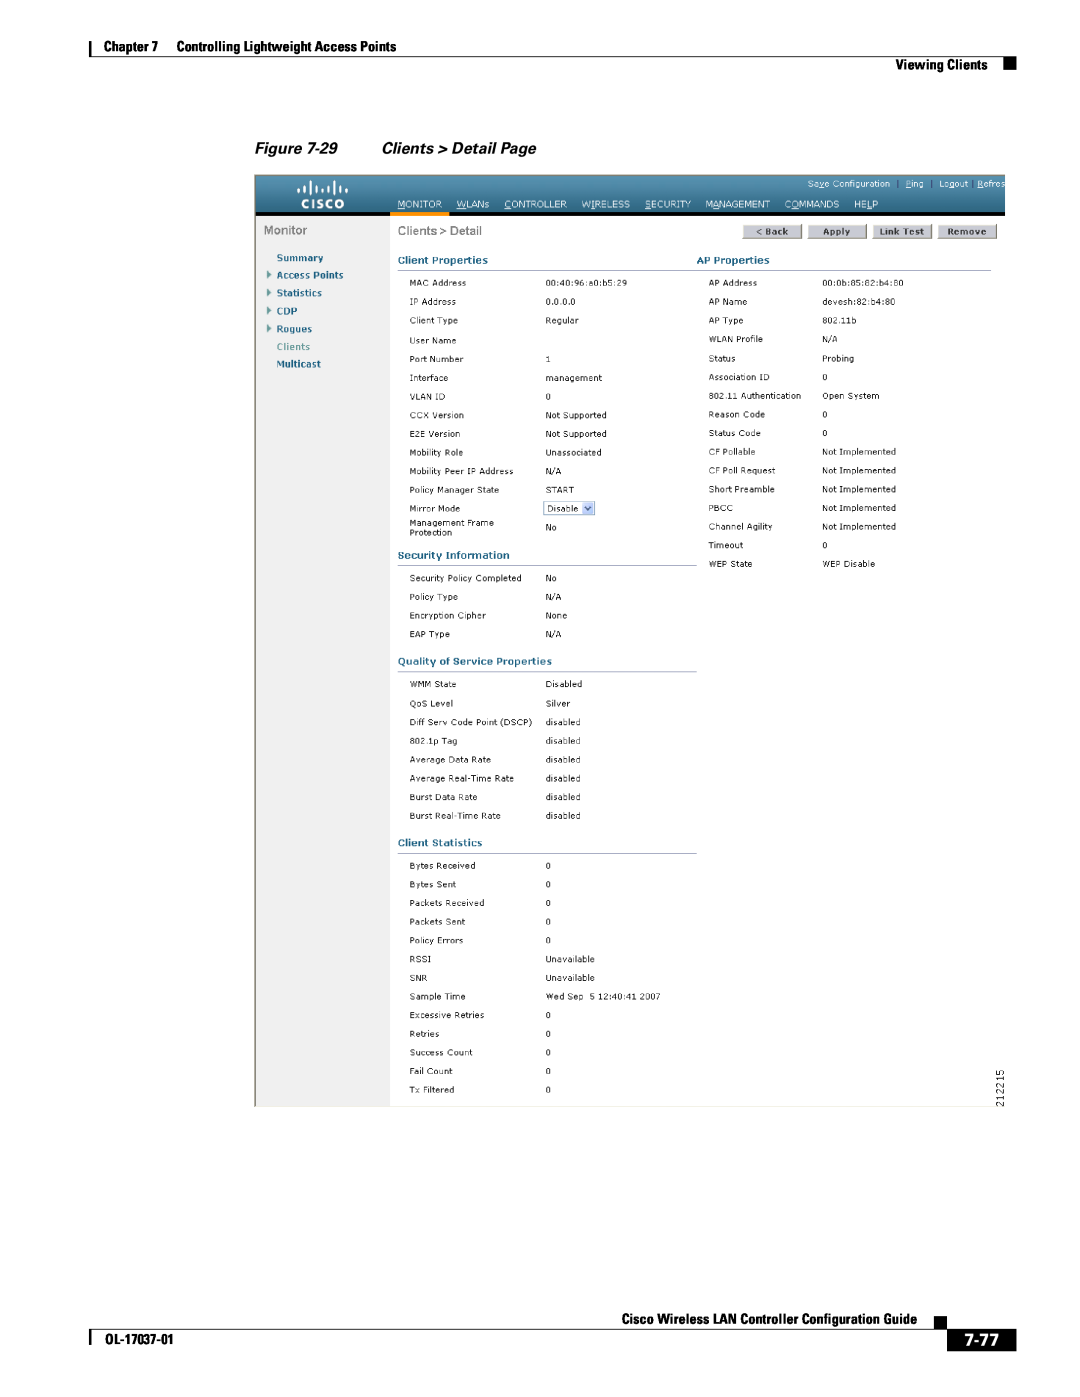 Cisco Systems OL-17037-01 manual 7-77, 29 Clients Detail Page, Controlling Lightweight Access Points Viewing Clients 